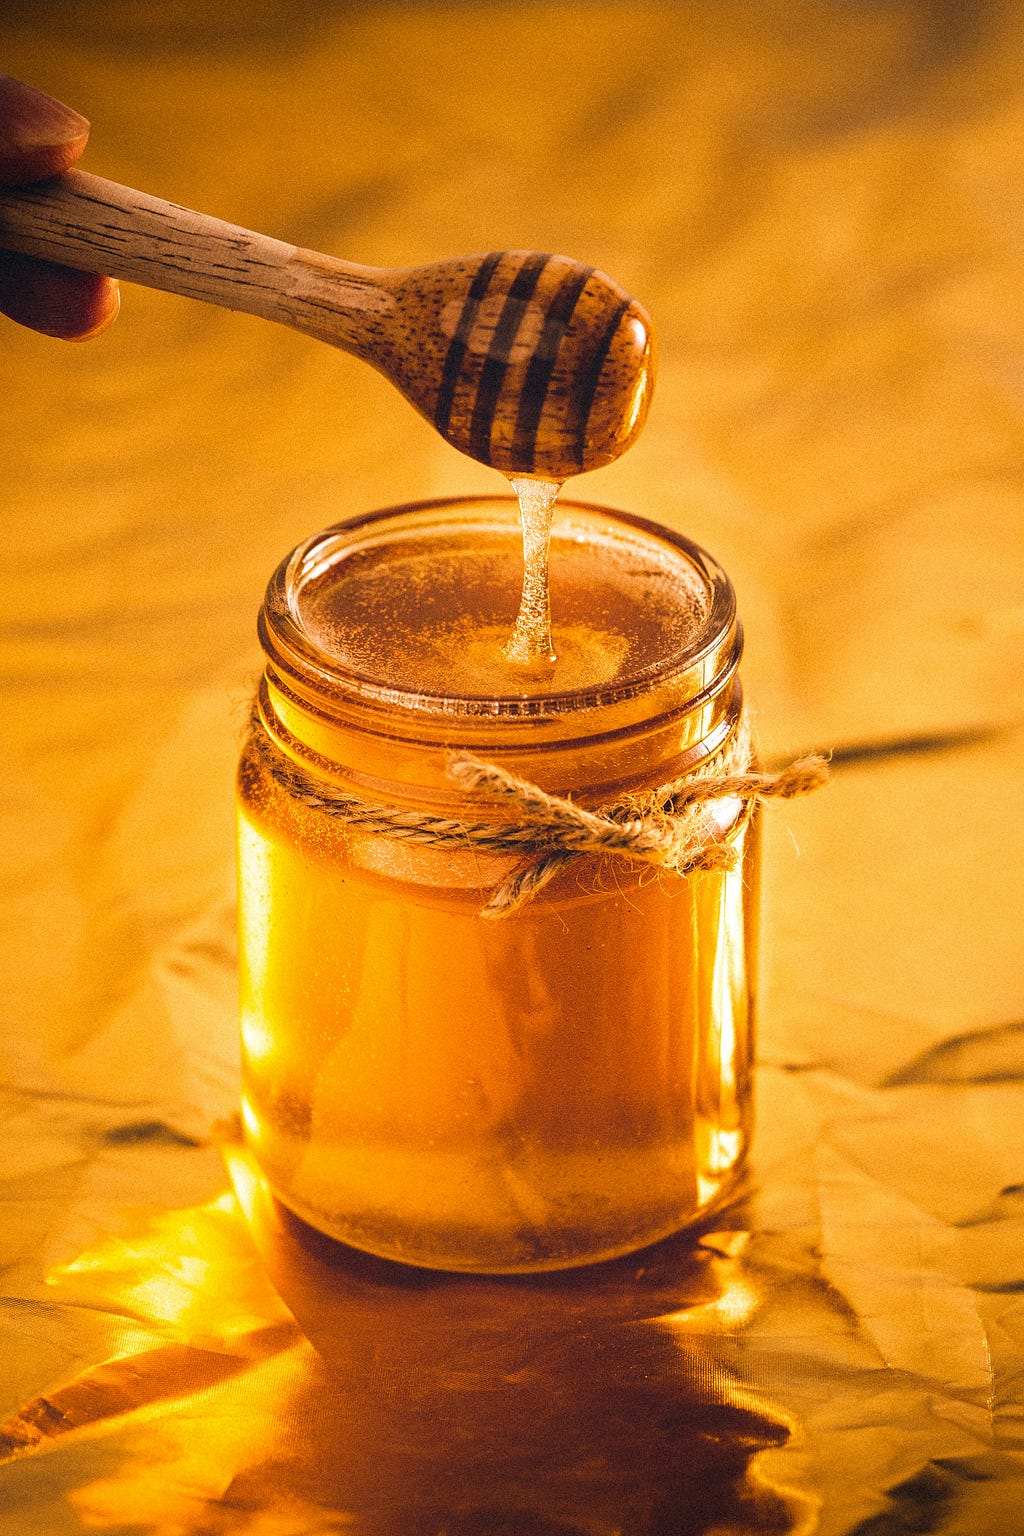 Honey made with nactar of flower.